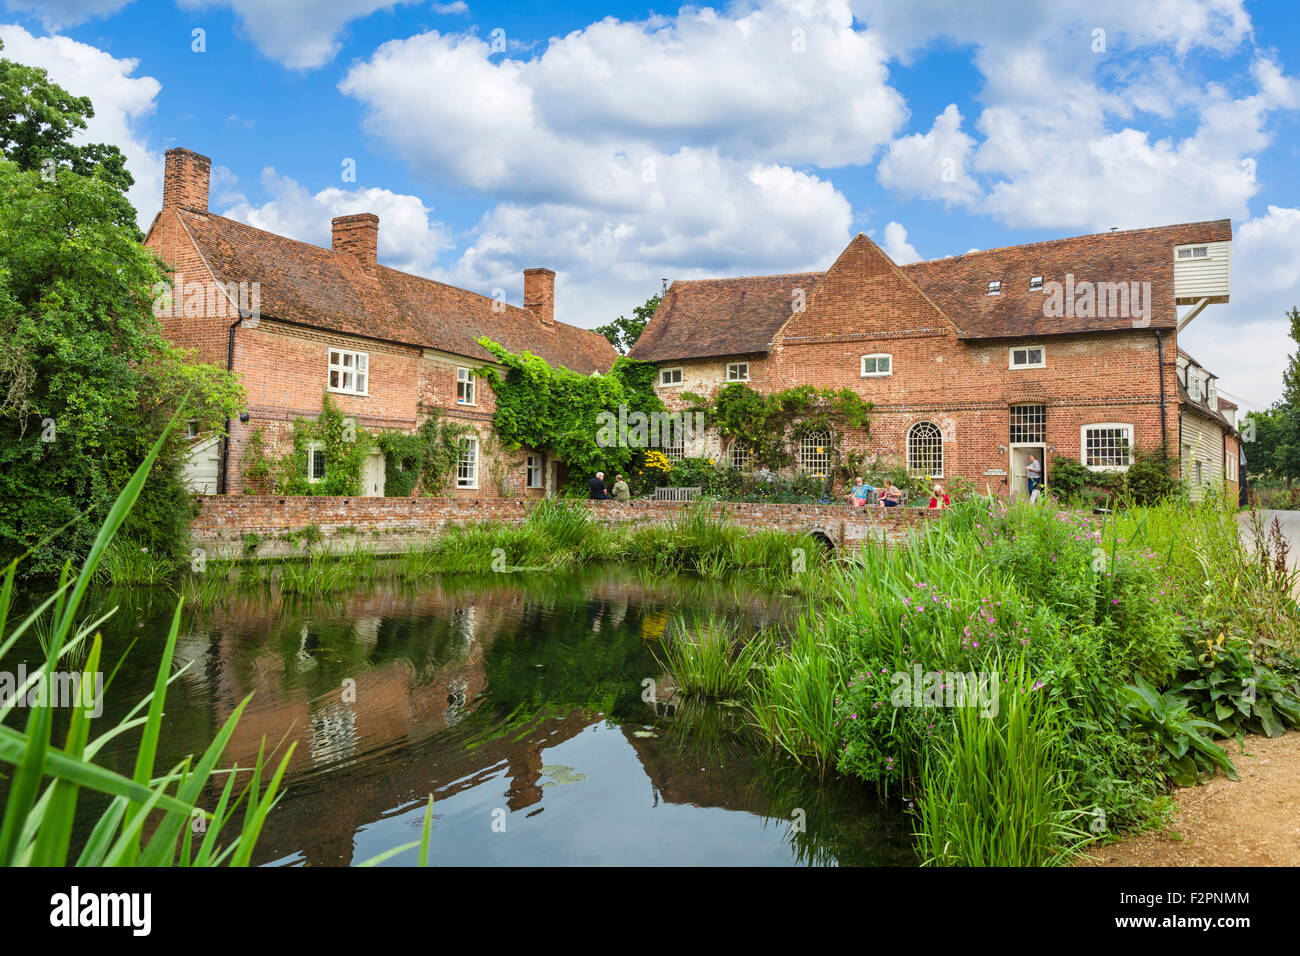 Flatford Mill, location for some of Constable’s paintings including the Hay Wain, East Bergholt, Dedham Vale, Essex, England, UK Stock Photo